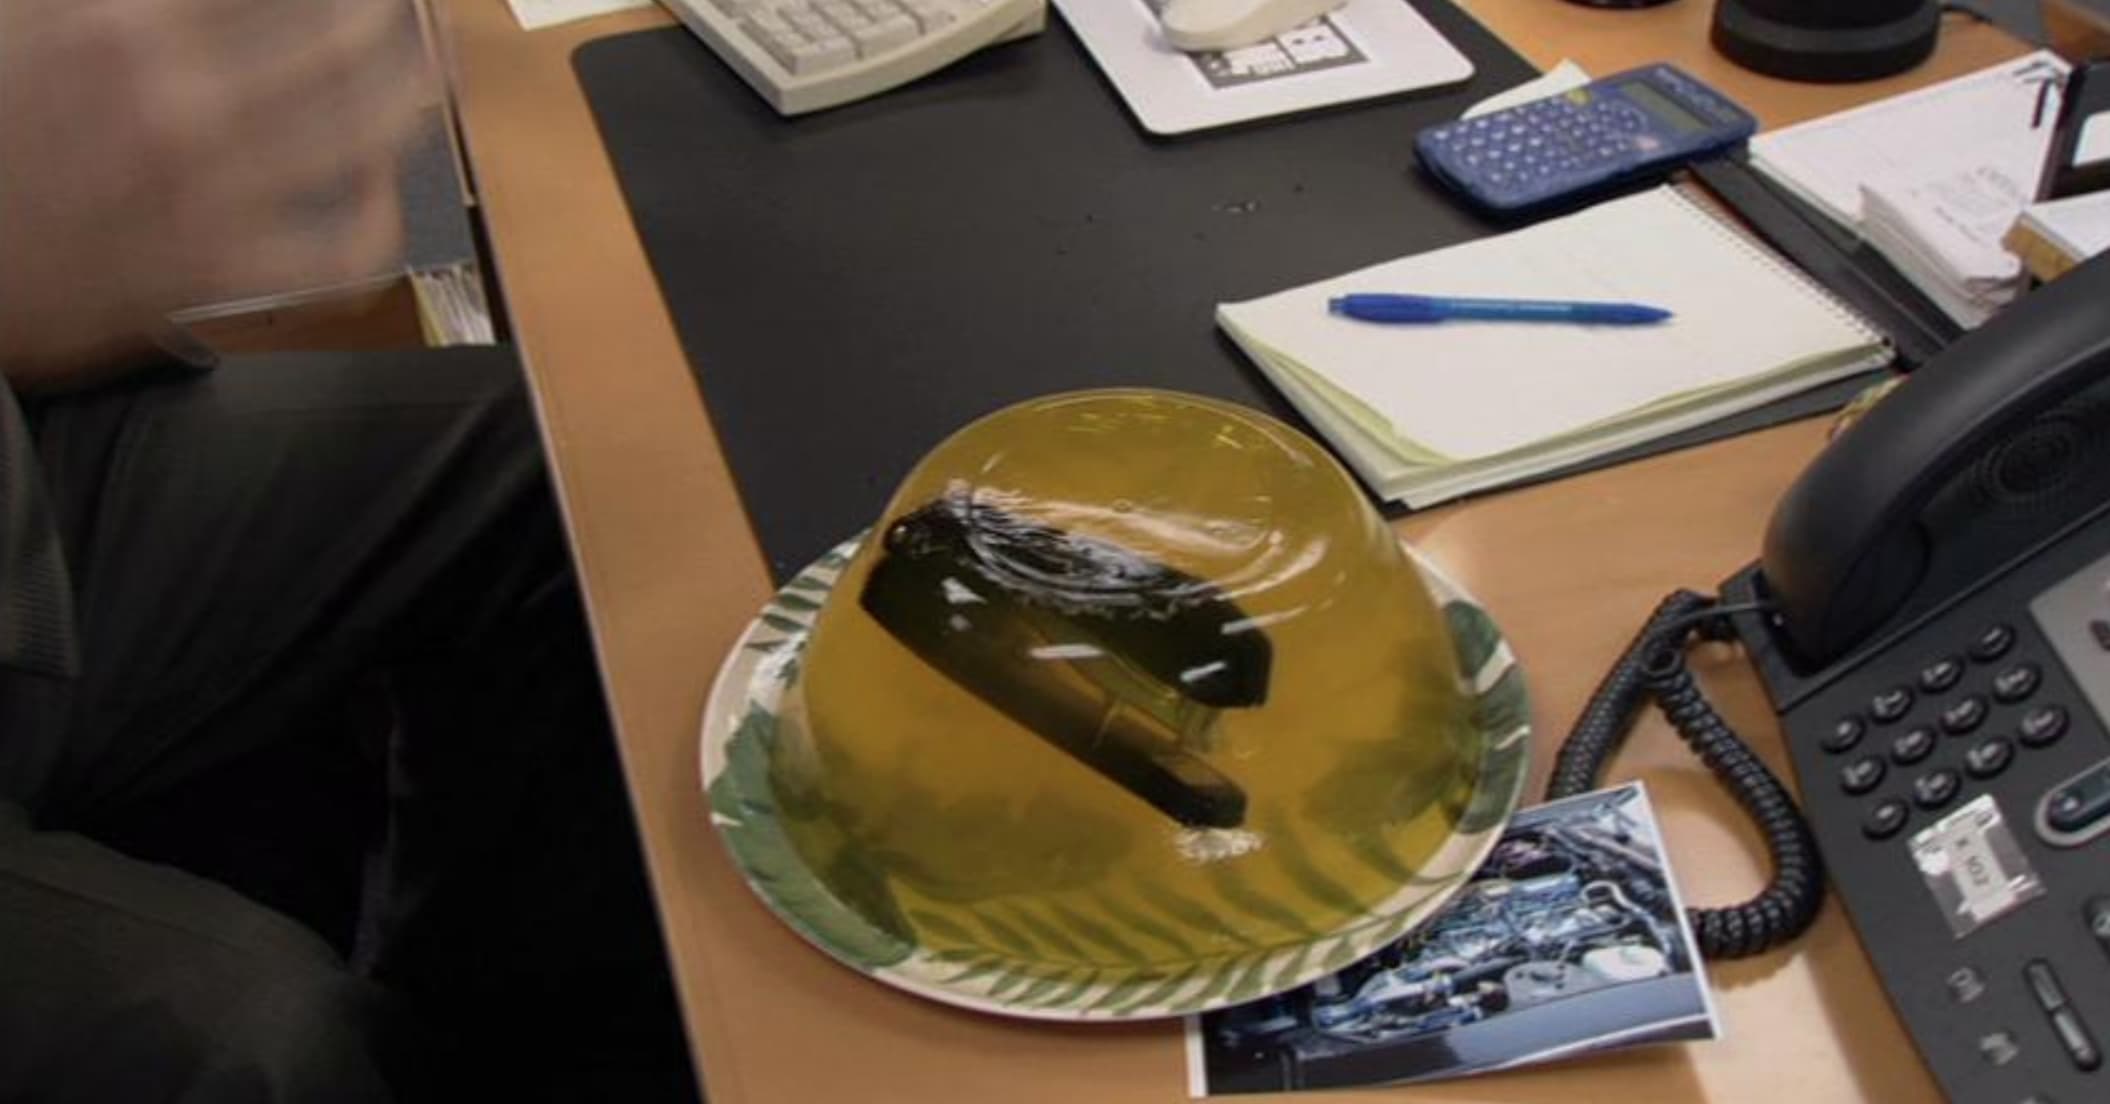 181 People Share Their Most Genius Office Pranks And Some Of Them